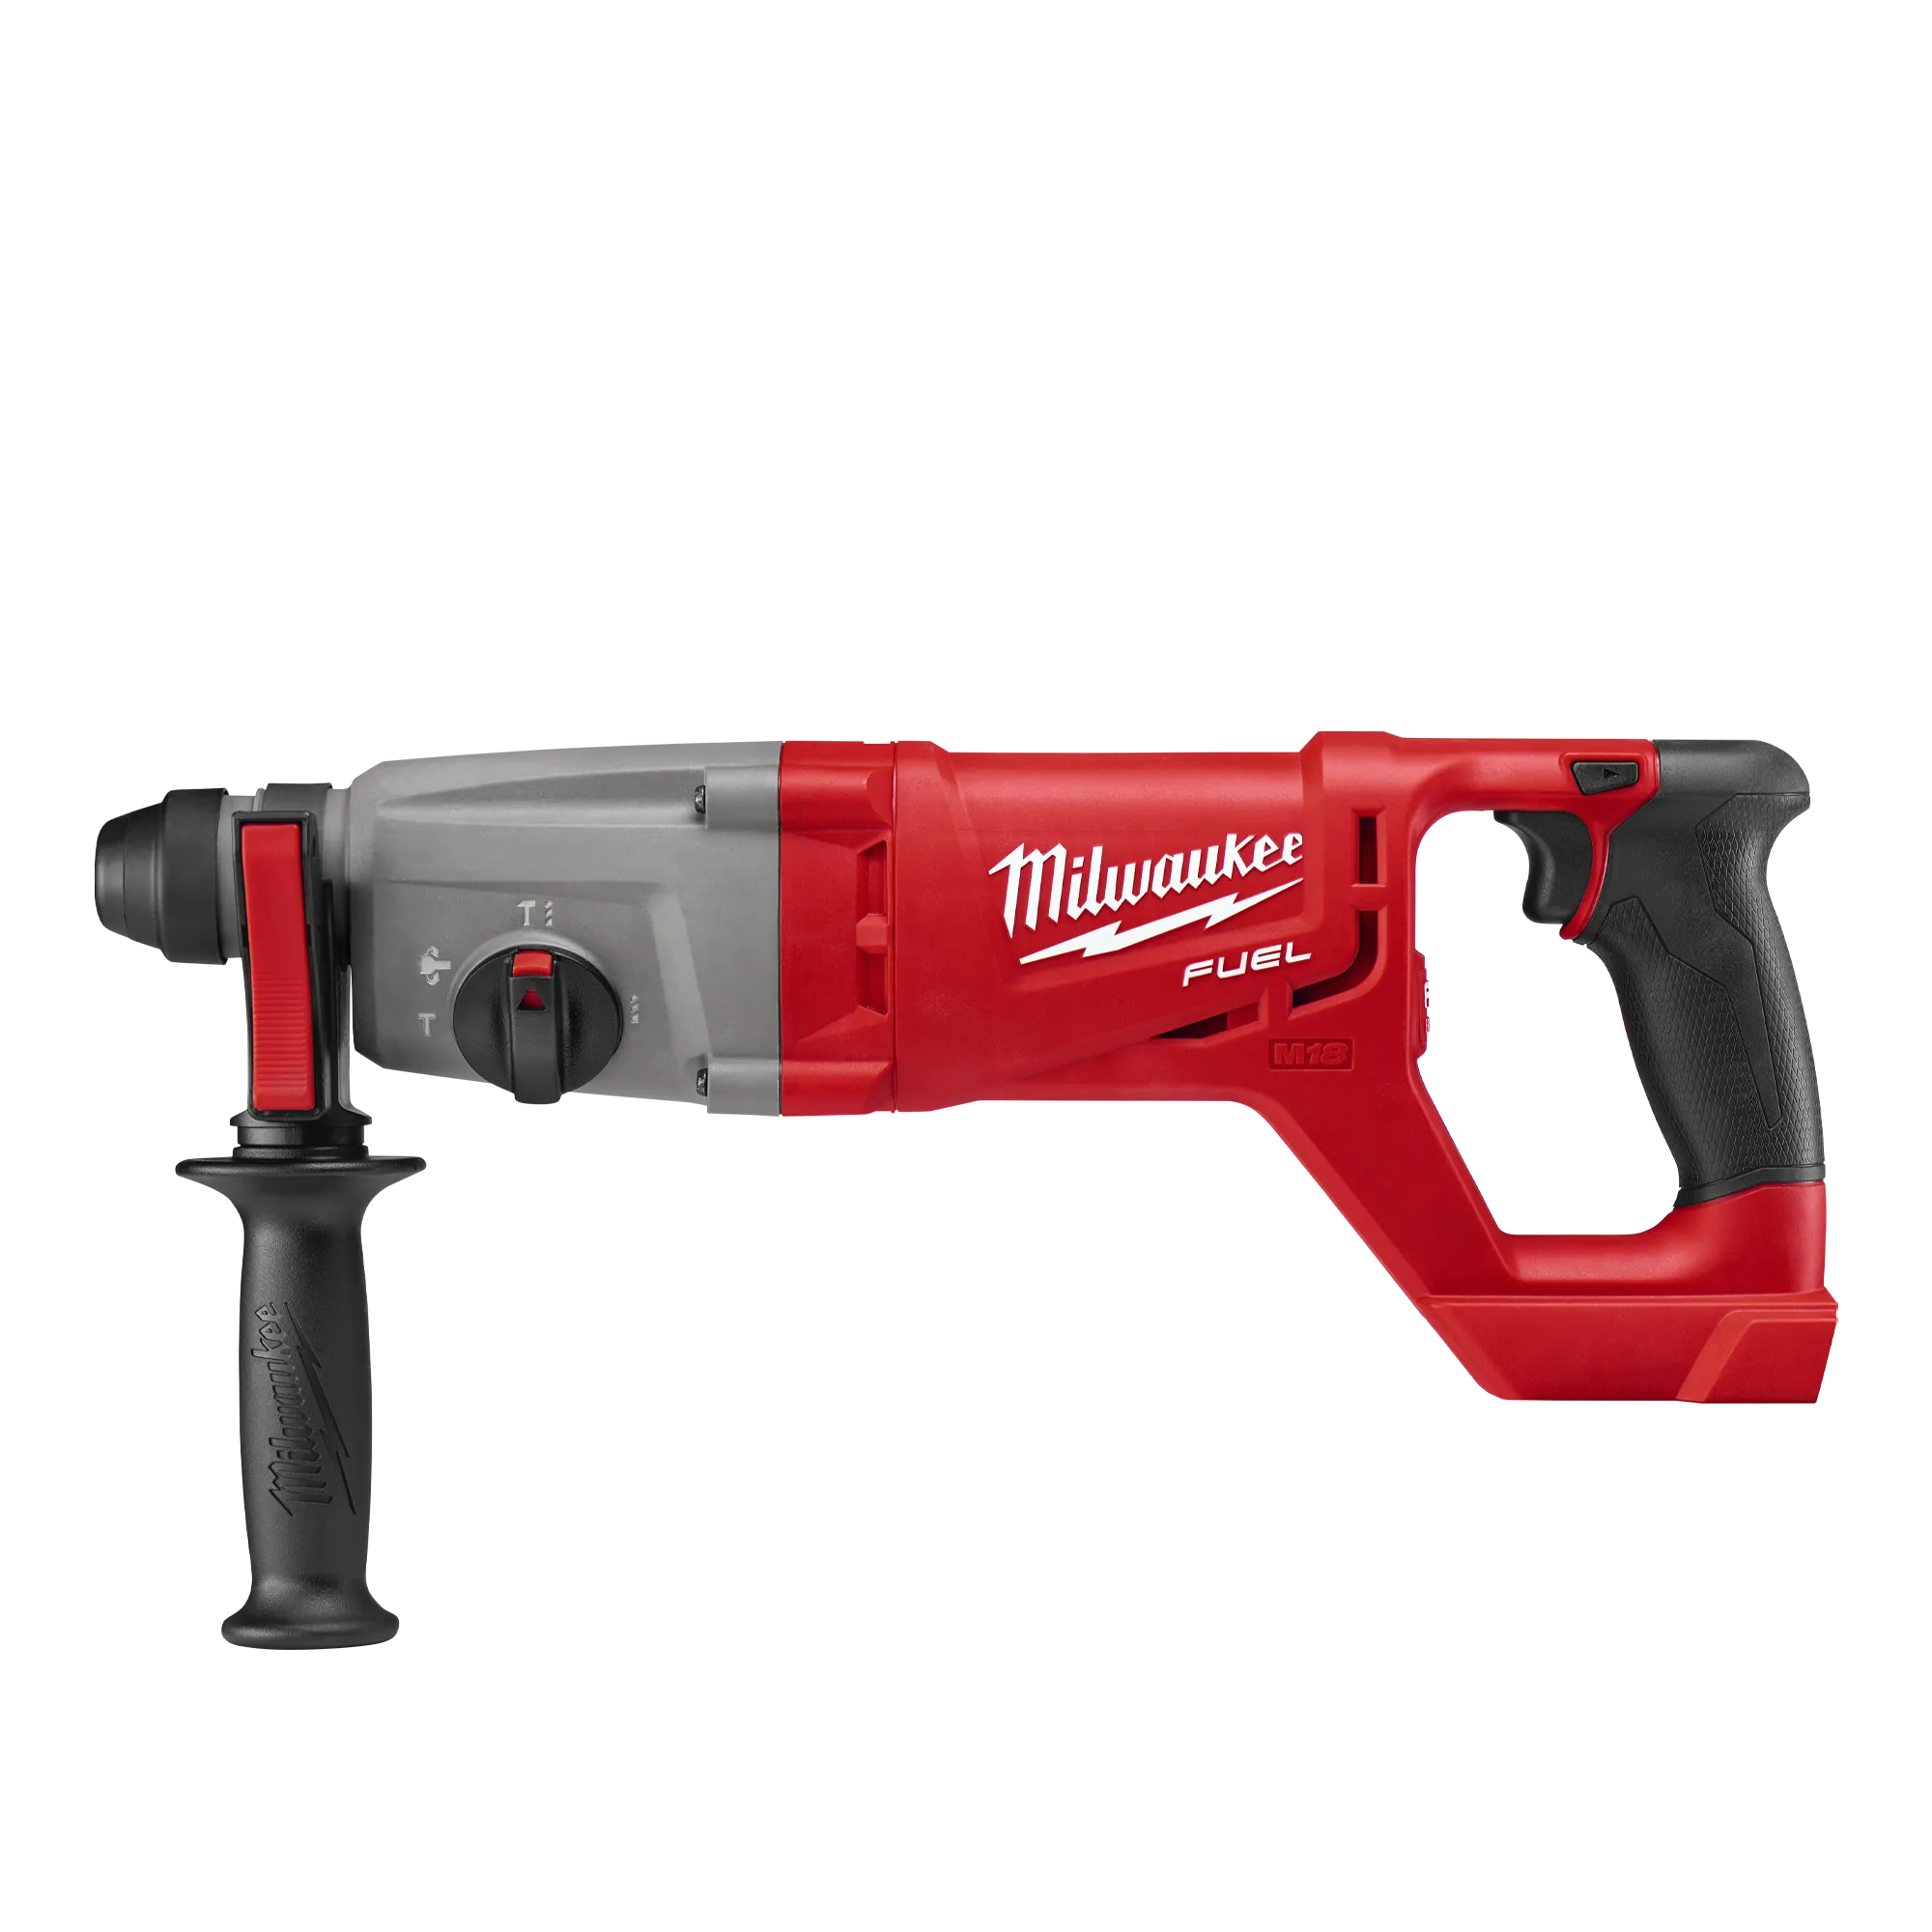 M18 FUEL™ 1" SDS Plus D-Handle Rotary Hammer